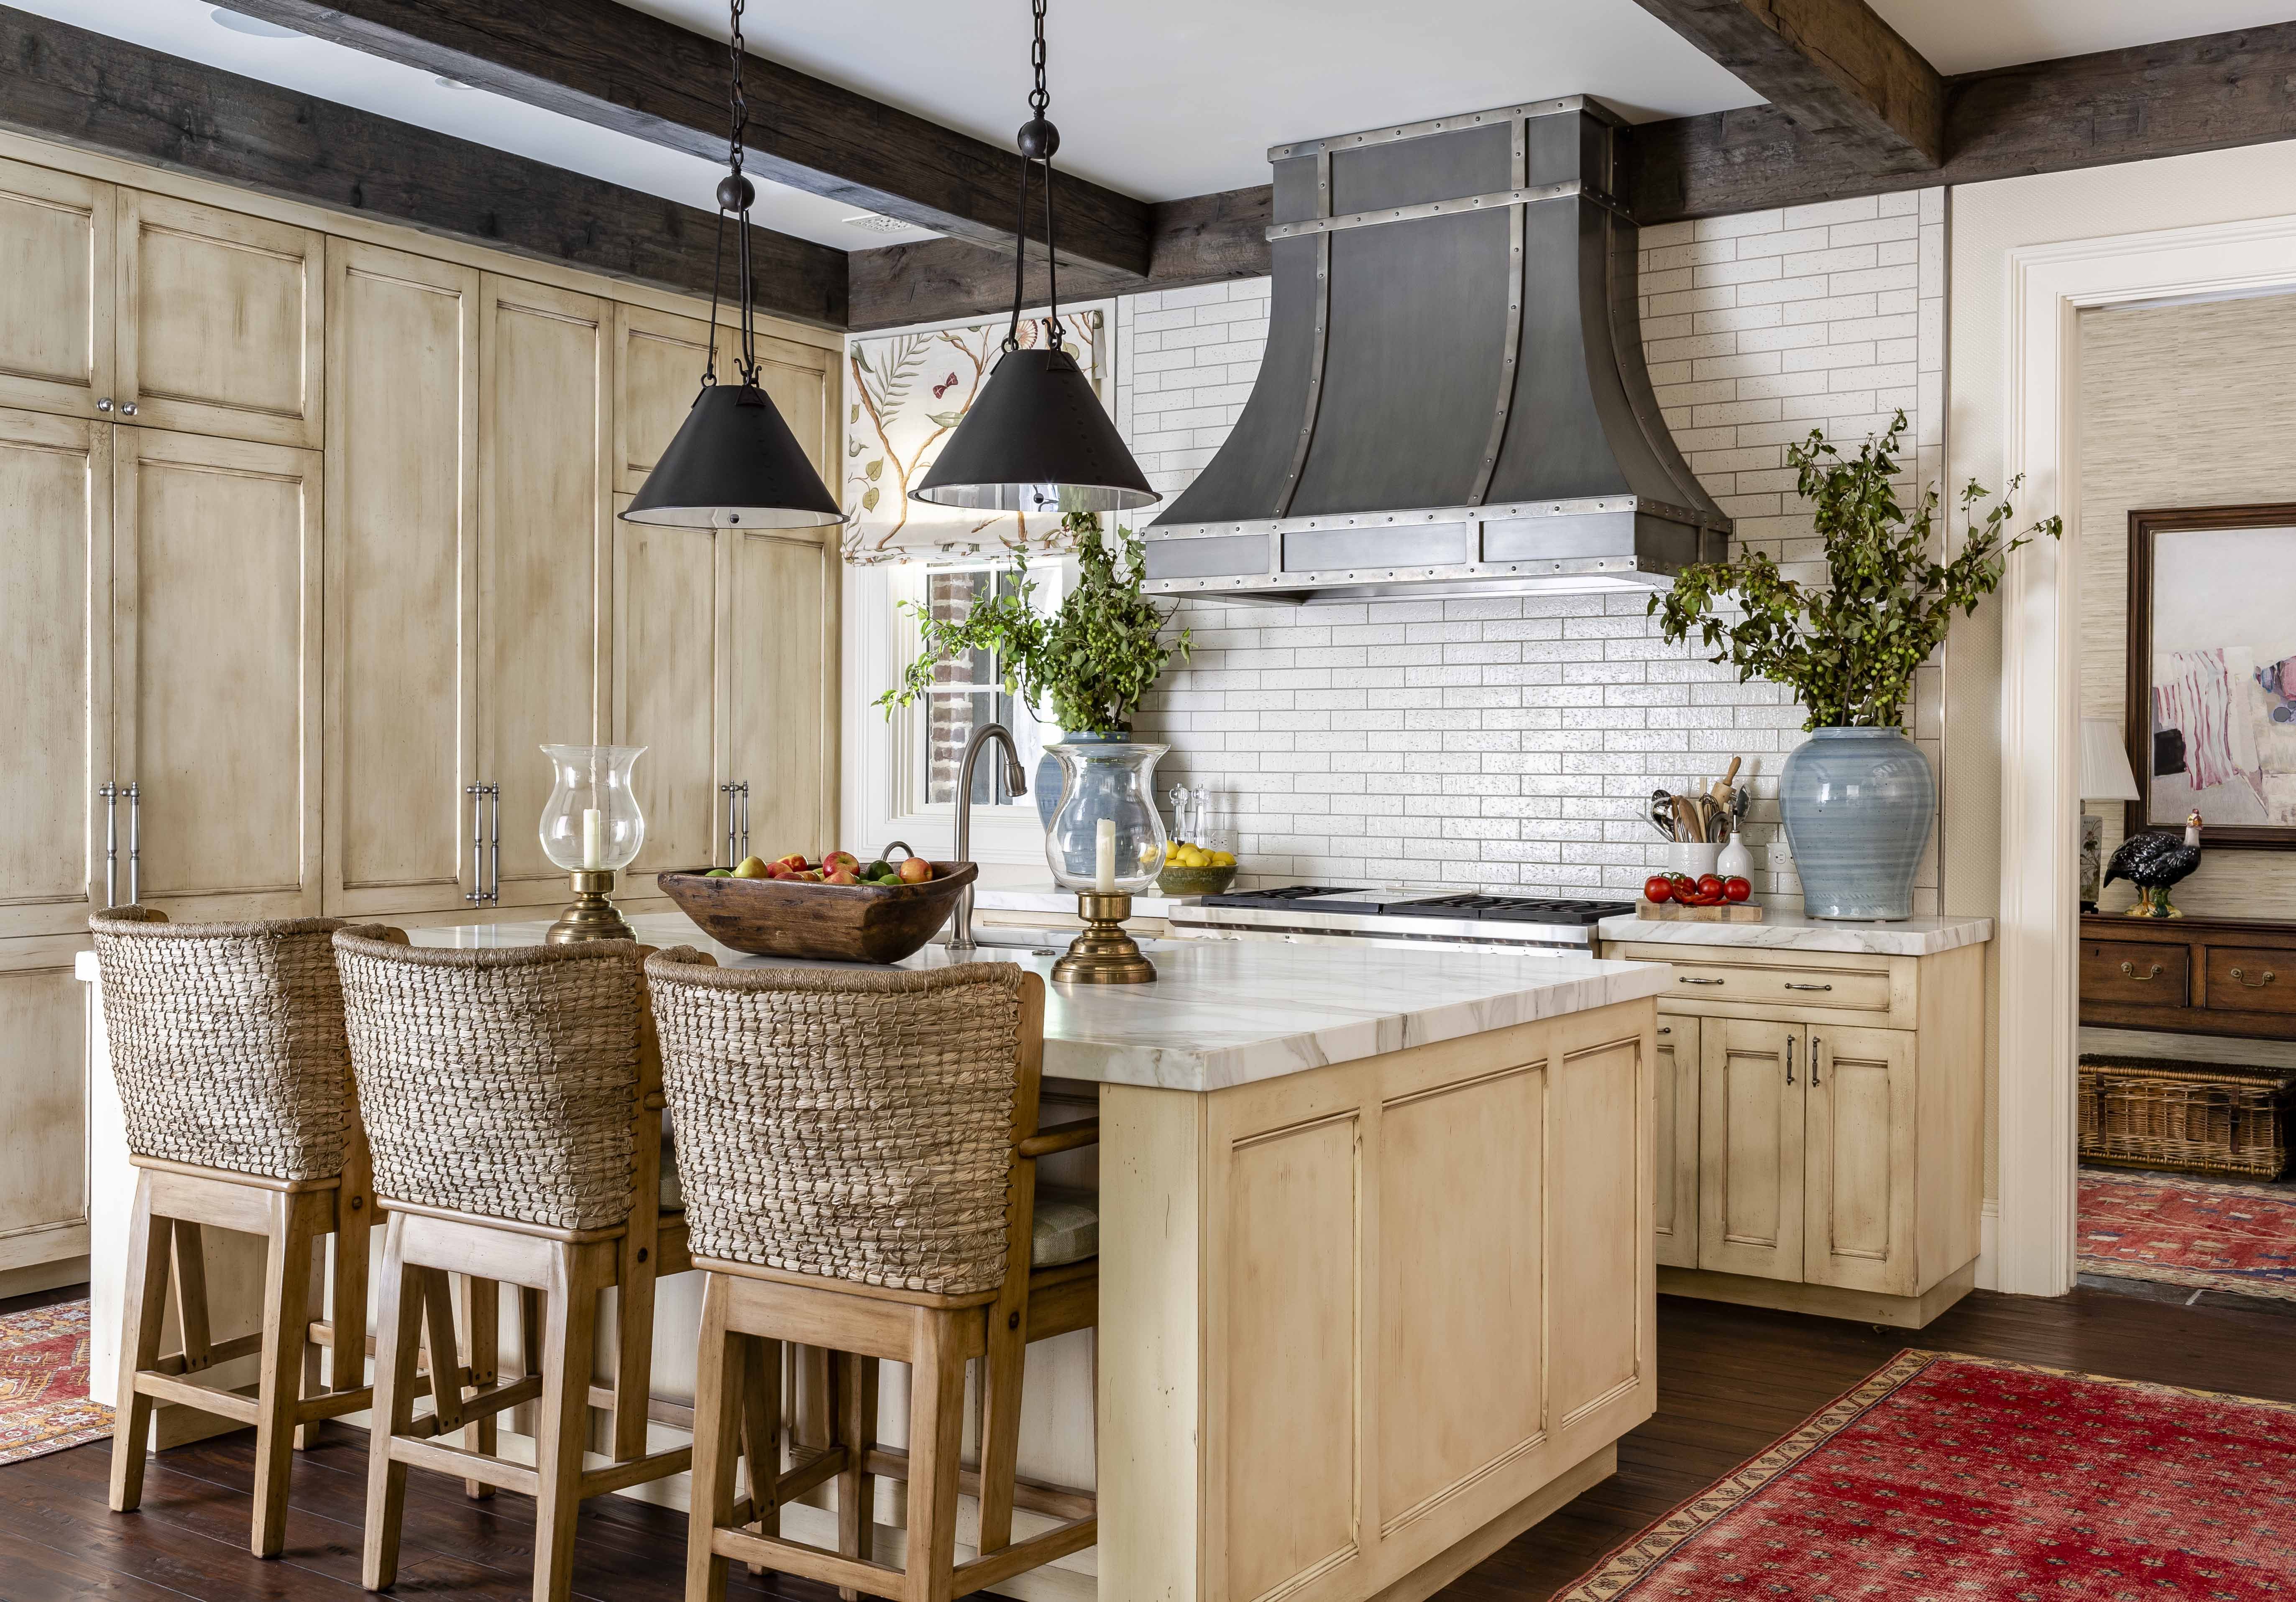 7 Fresh New Kitchen Trends We're Obsessed With  Kitchen trends, Interior  design kitchen, Kitchen inspirations